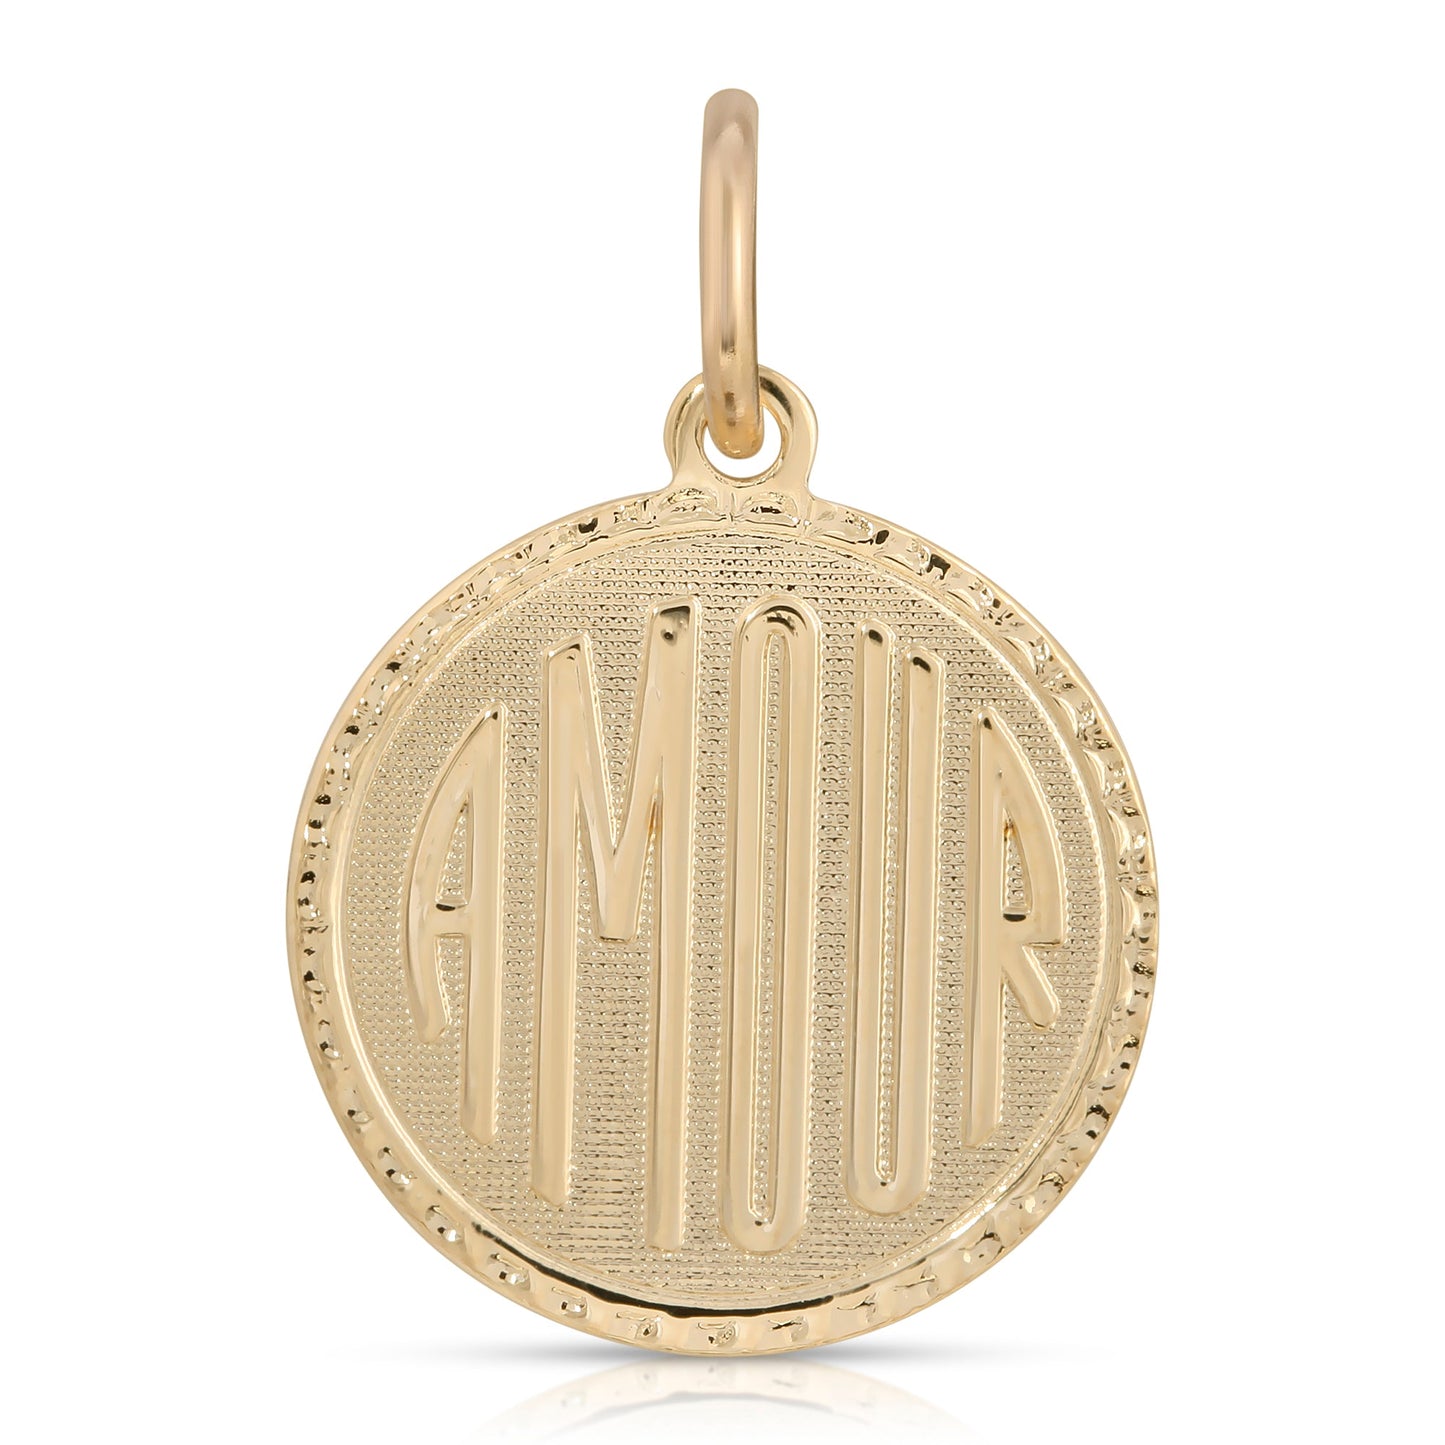 Anabelle 10K Plated "Amour" Gold Charm | Eklexic